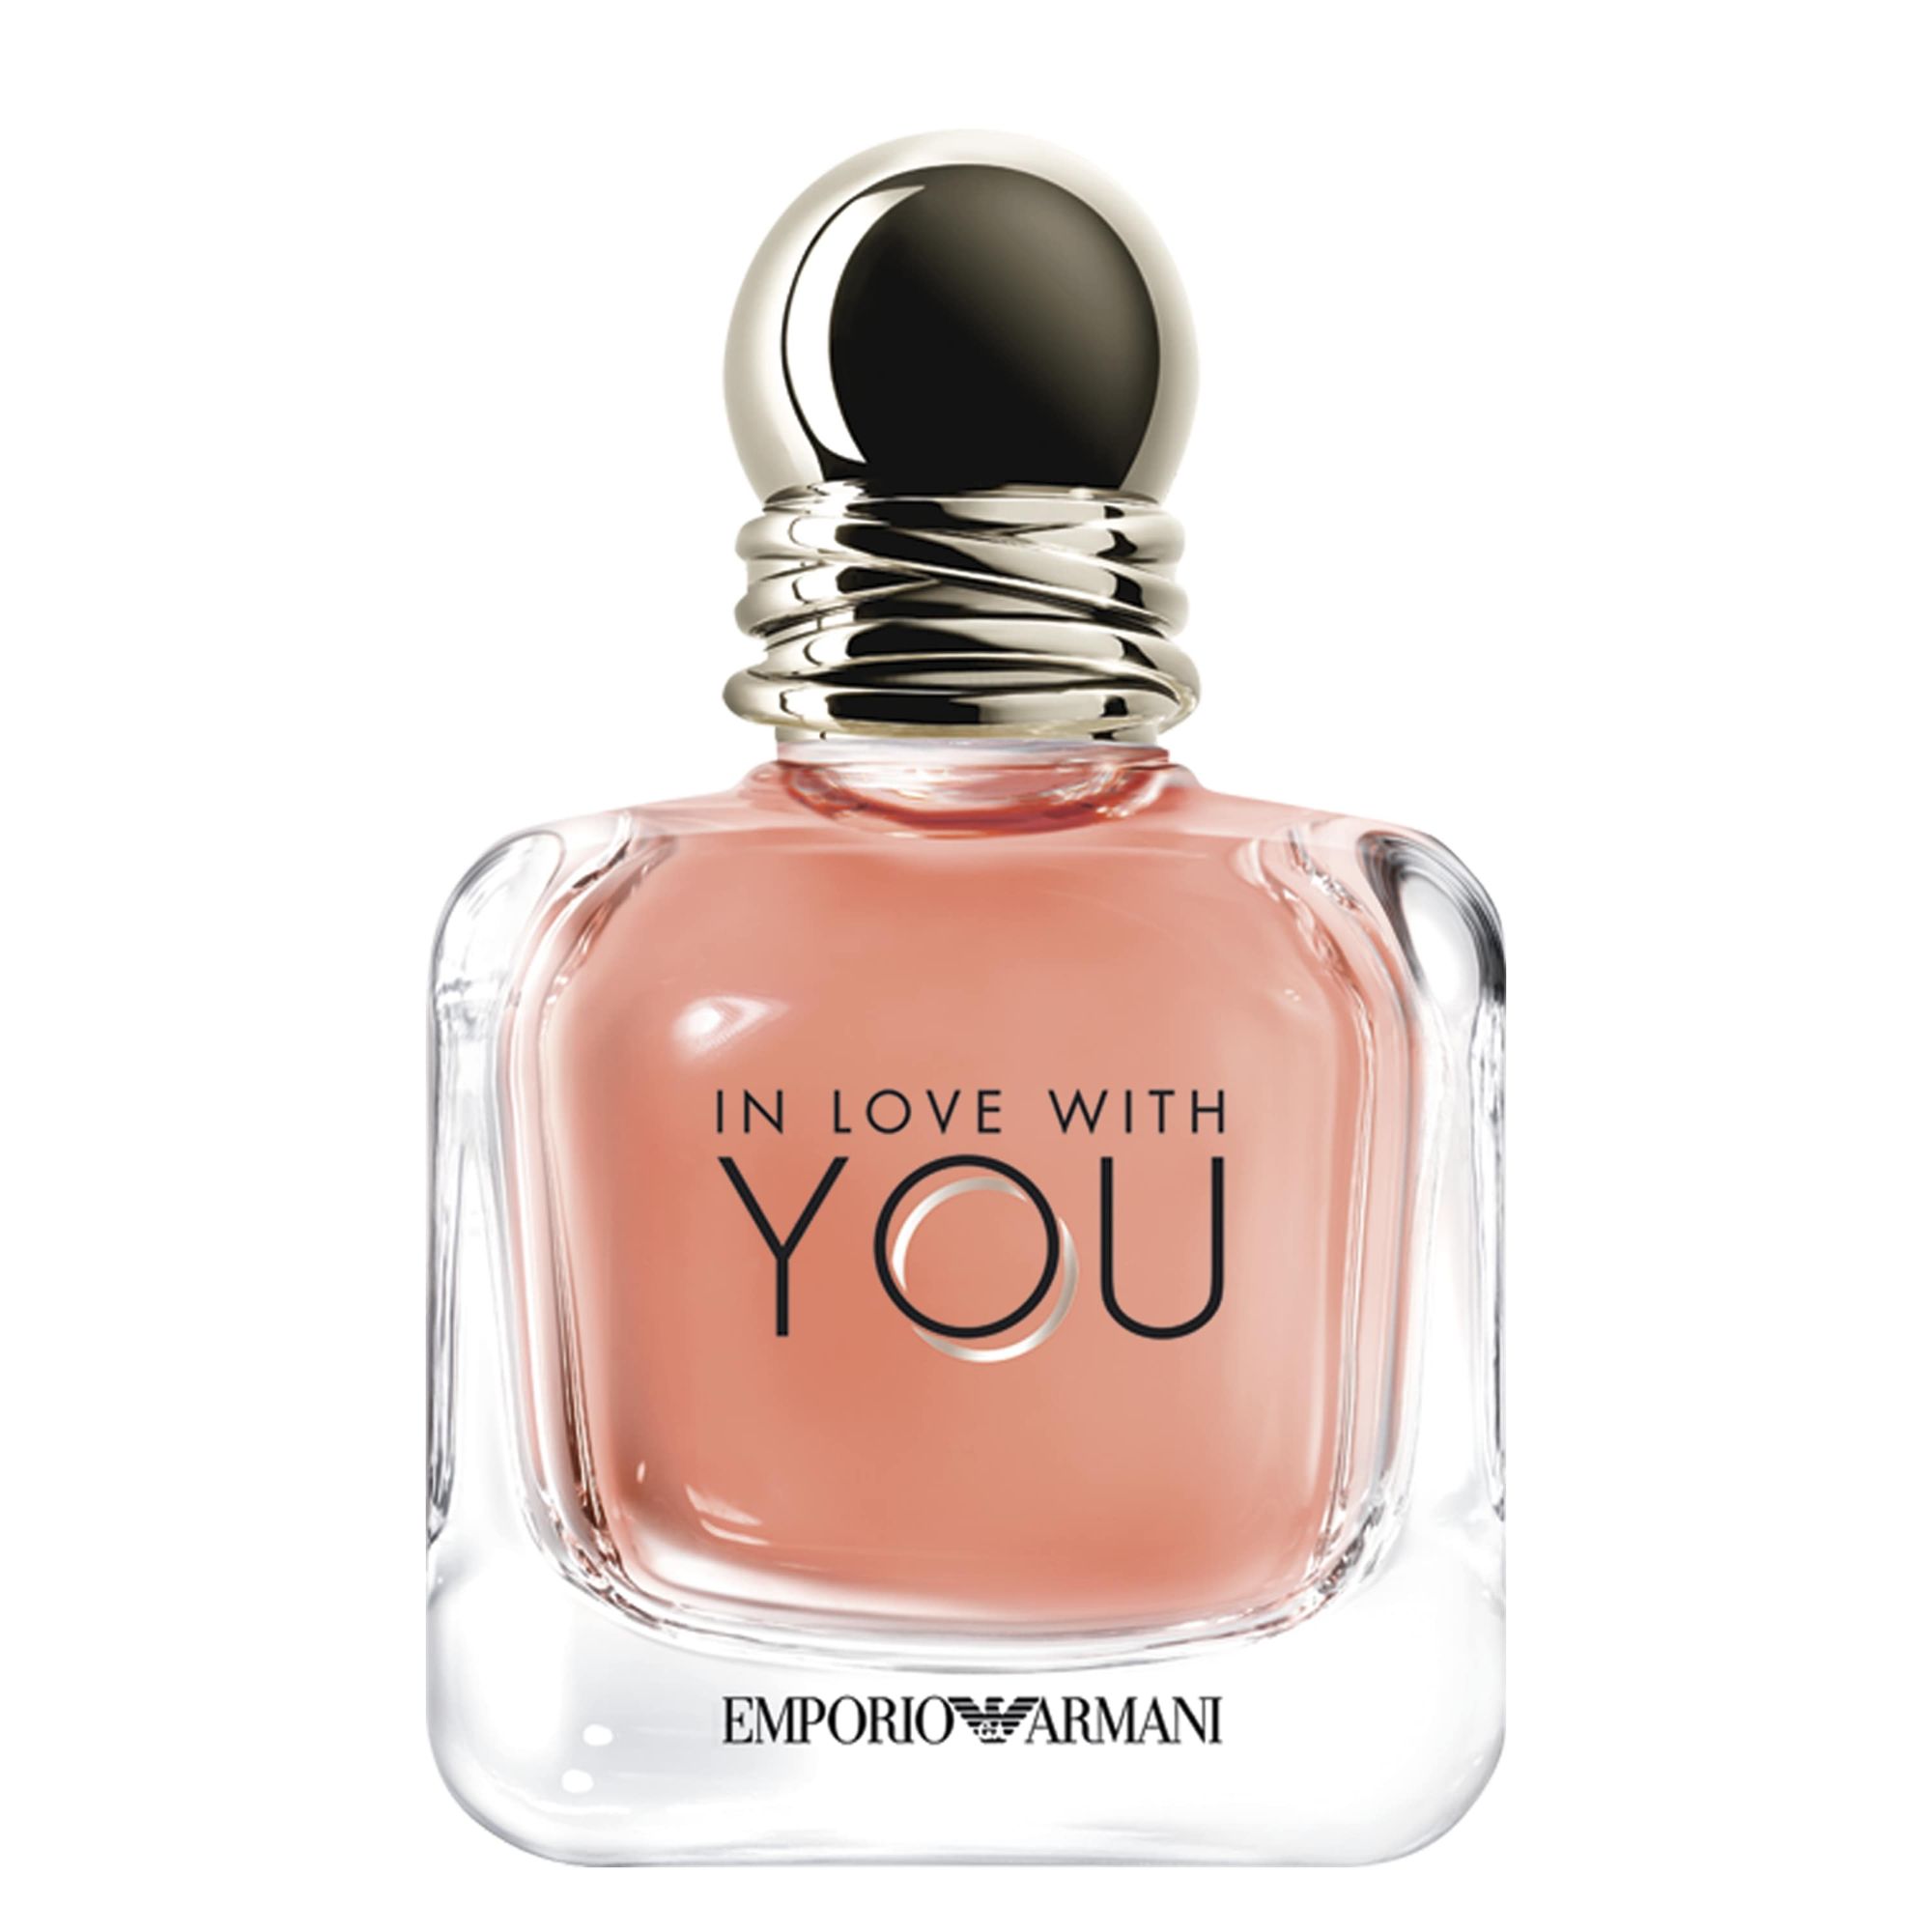 In Love With You Intensely She Eau de Parfum